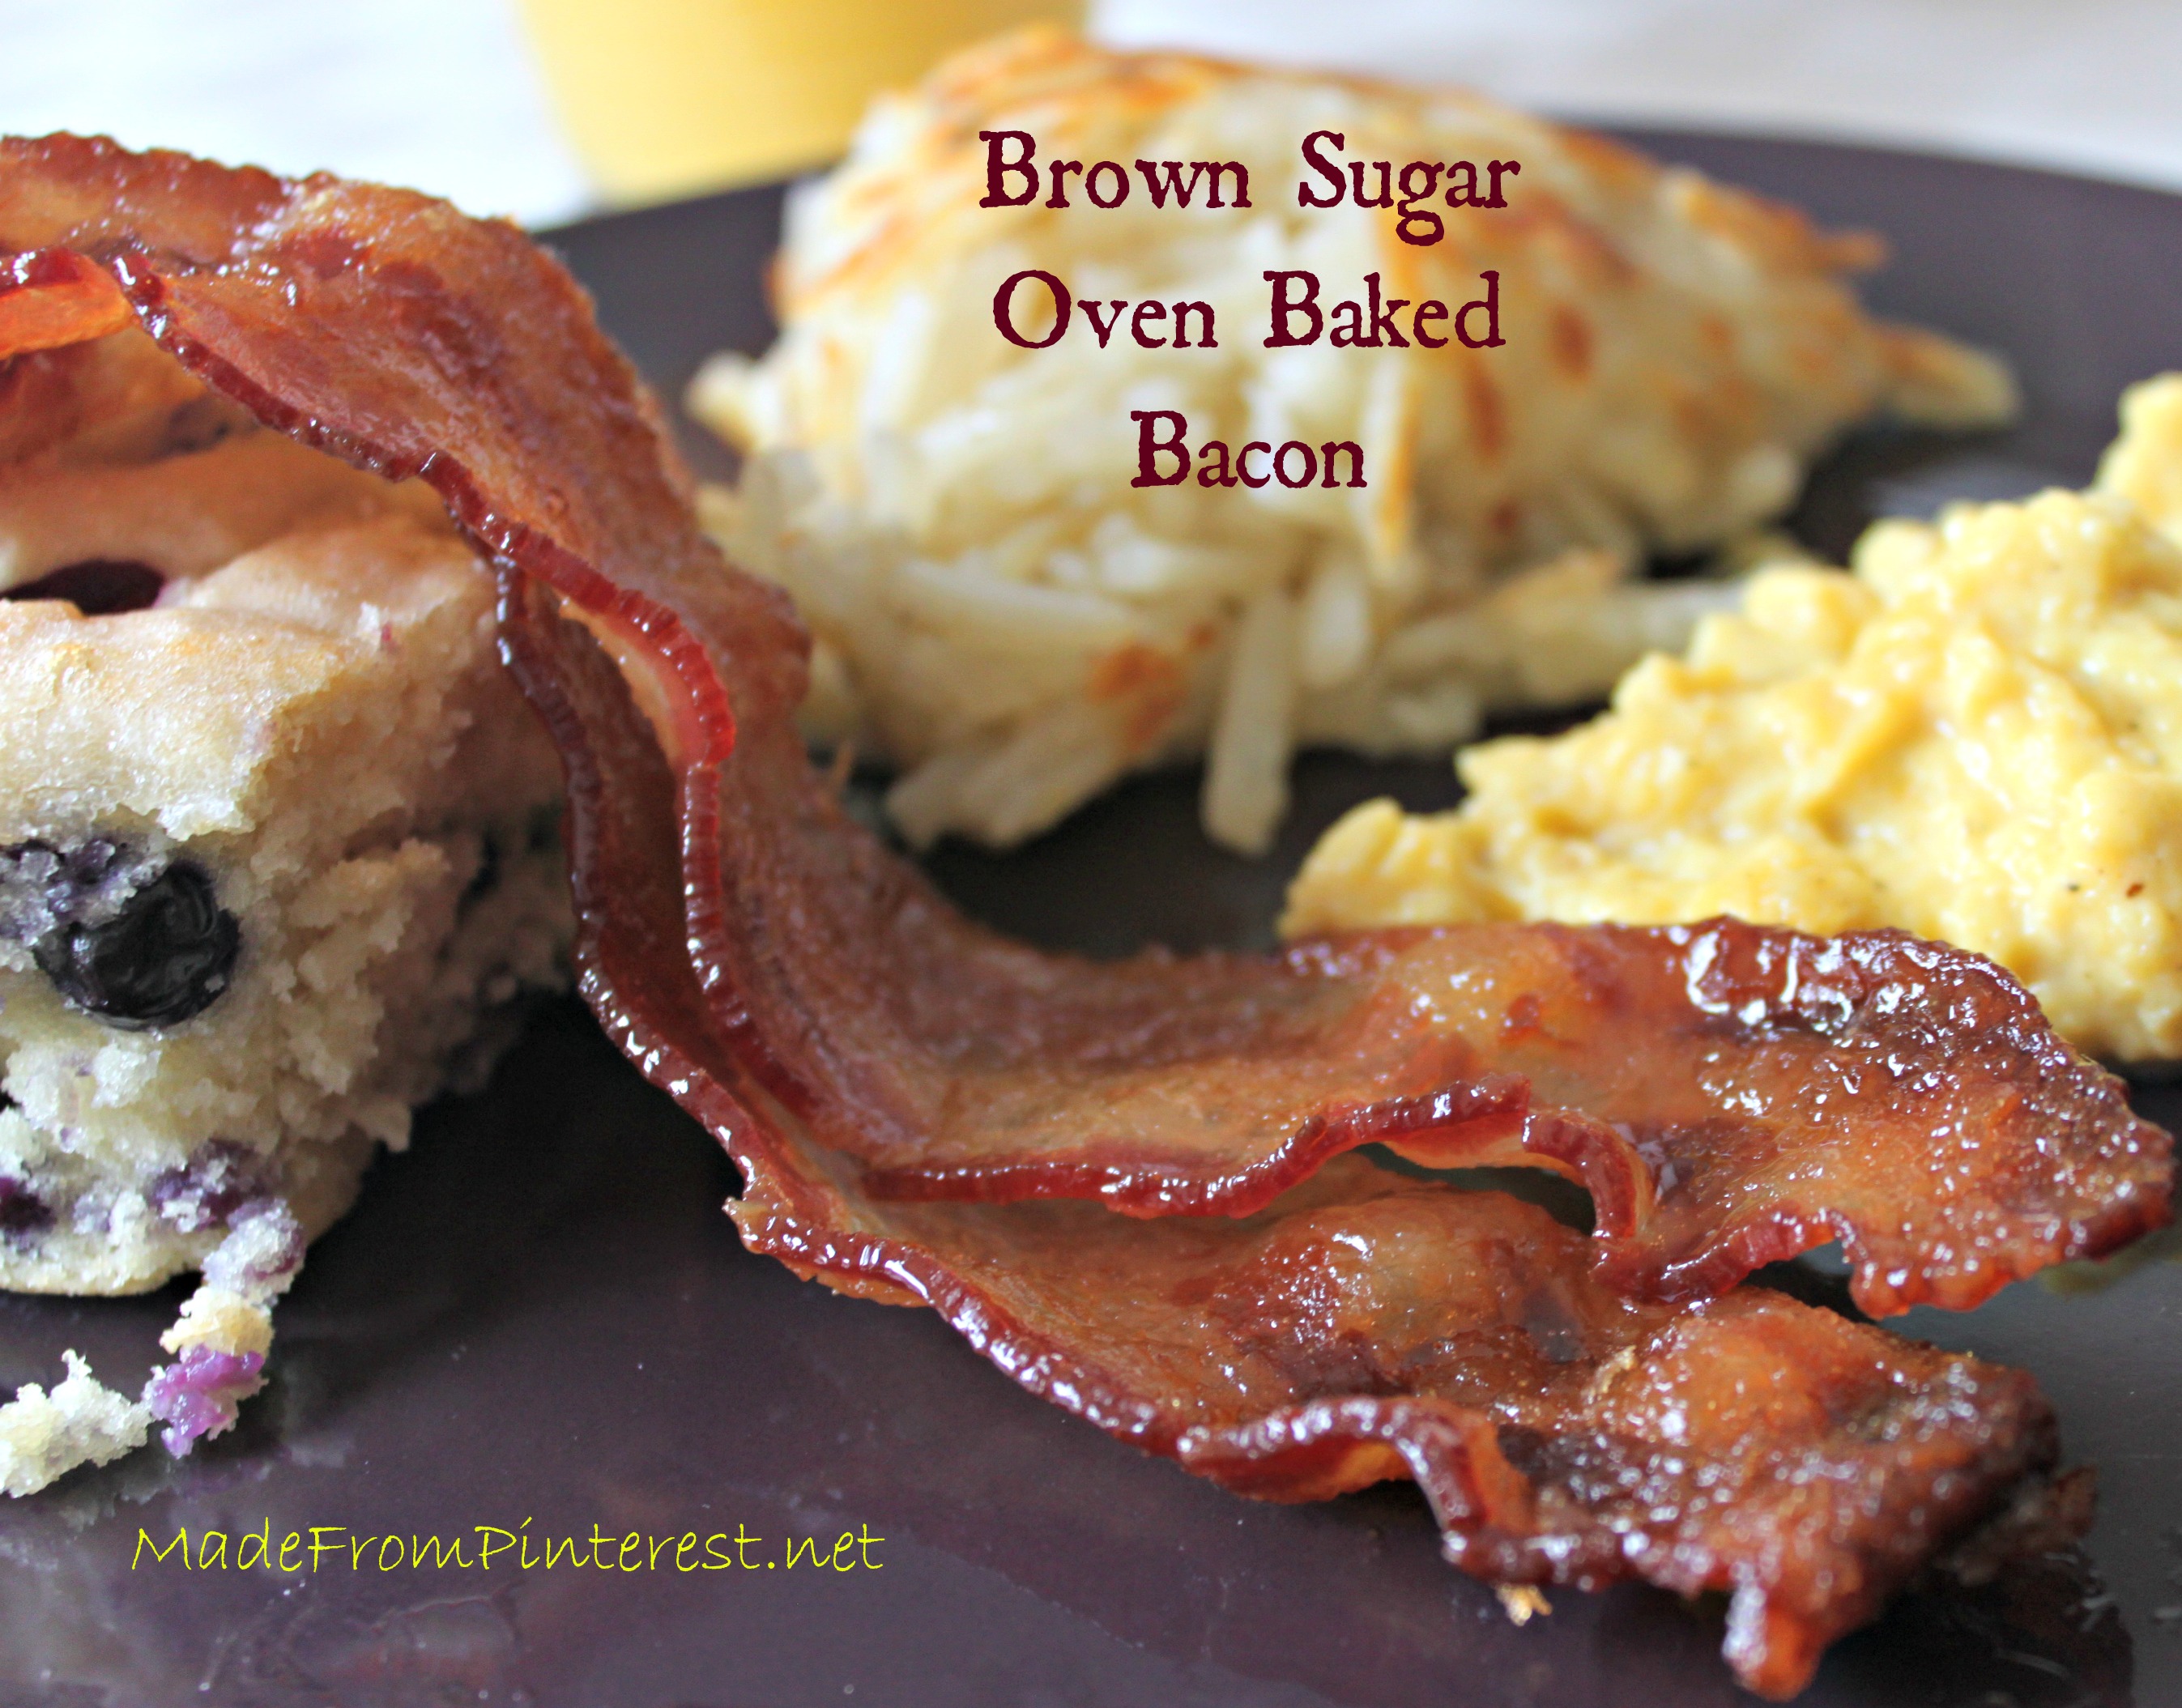 Brown Sugar Oven Baked Bacon